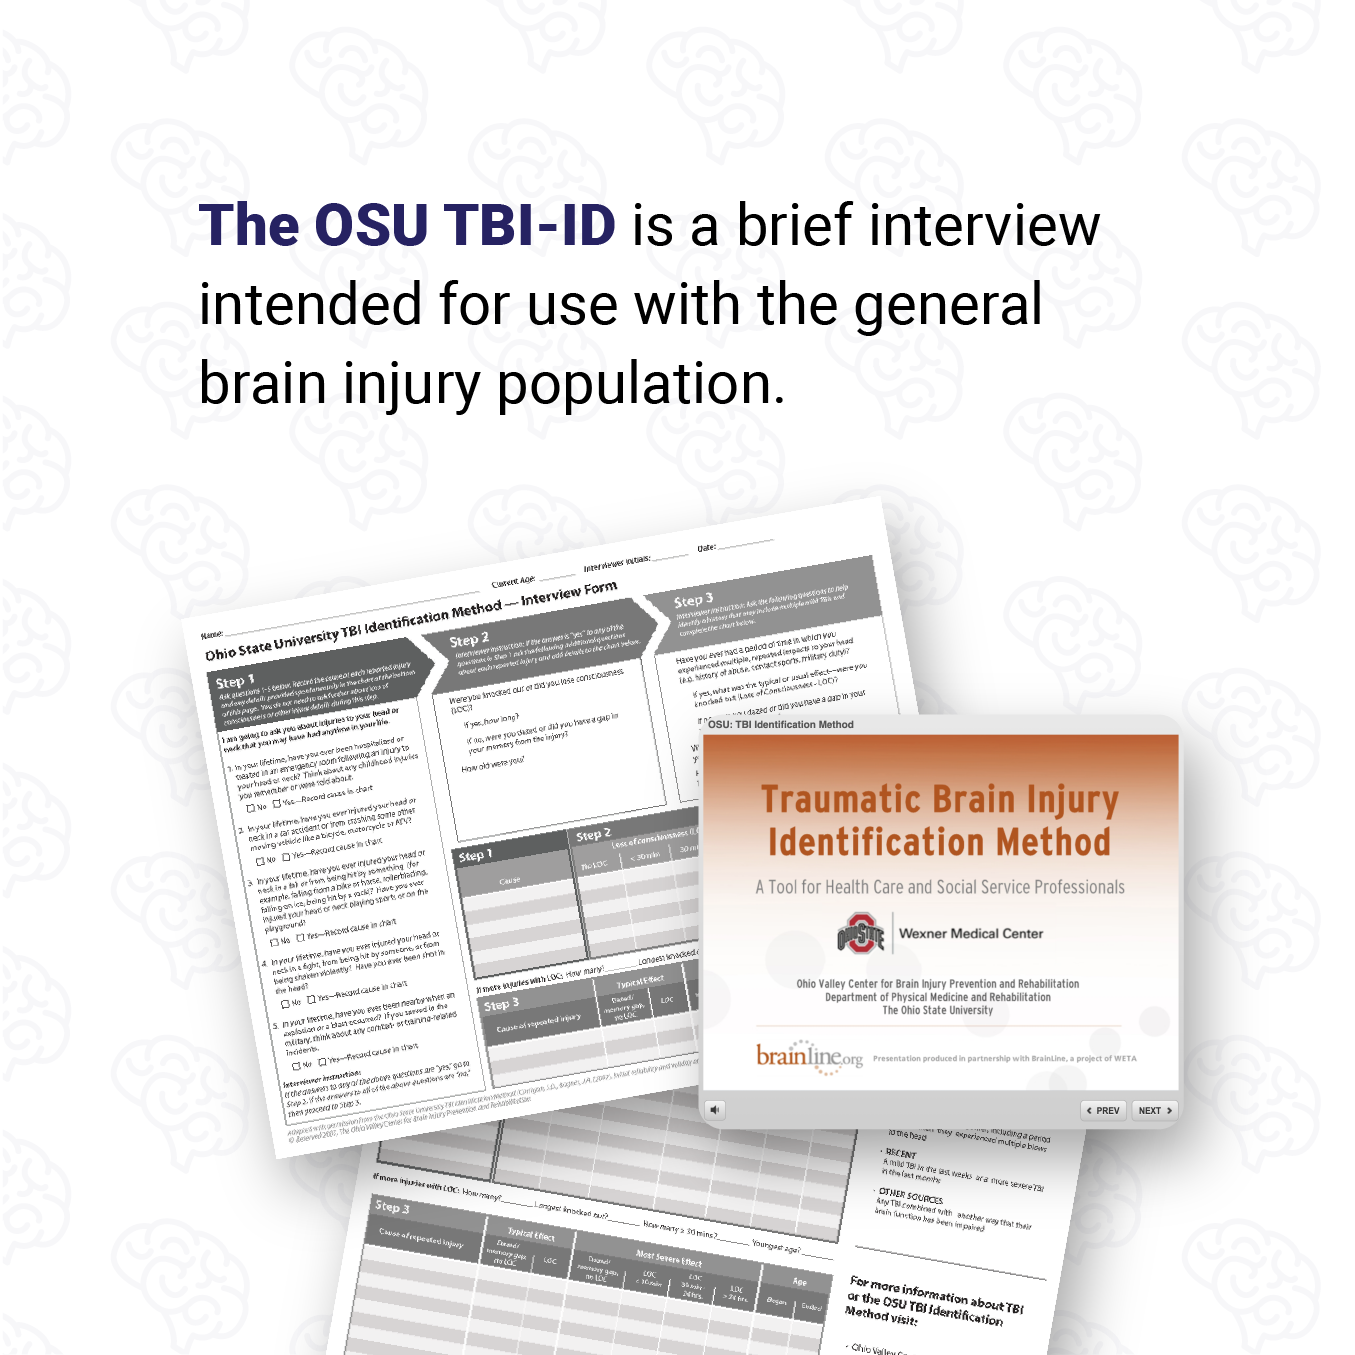 The OSU TBI-ID is a brief interview intended for use with the general brain injury population. 